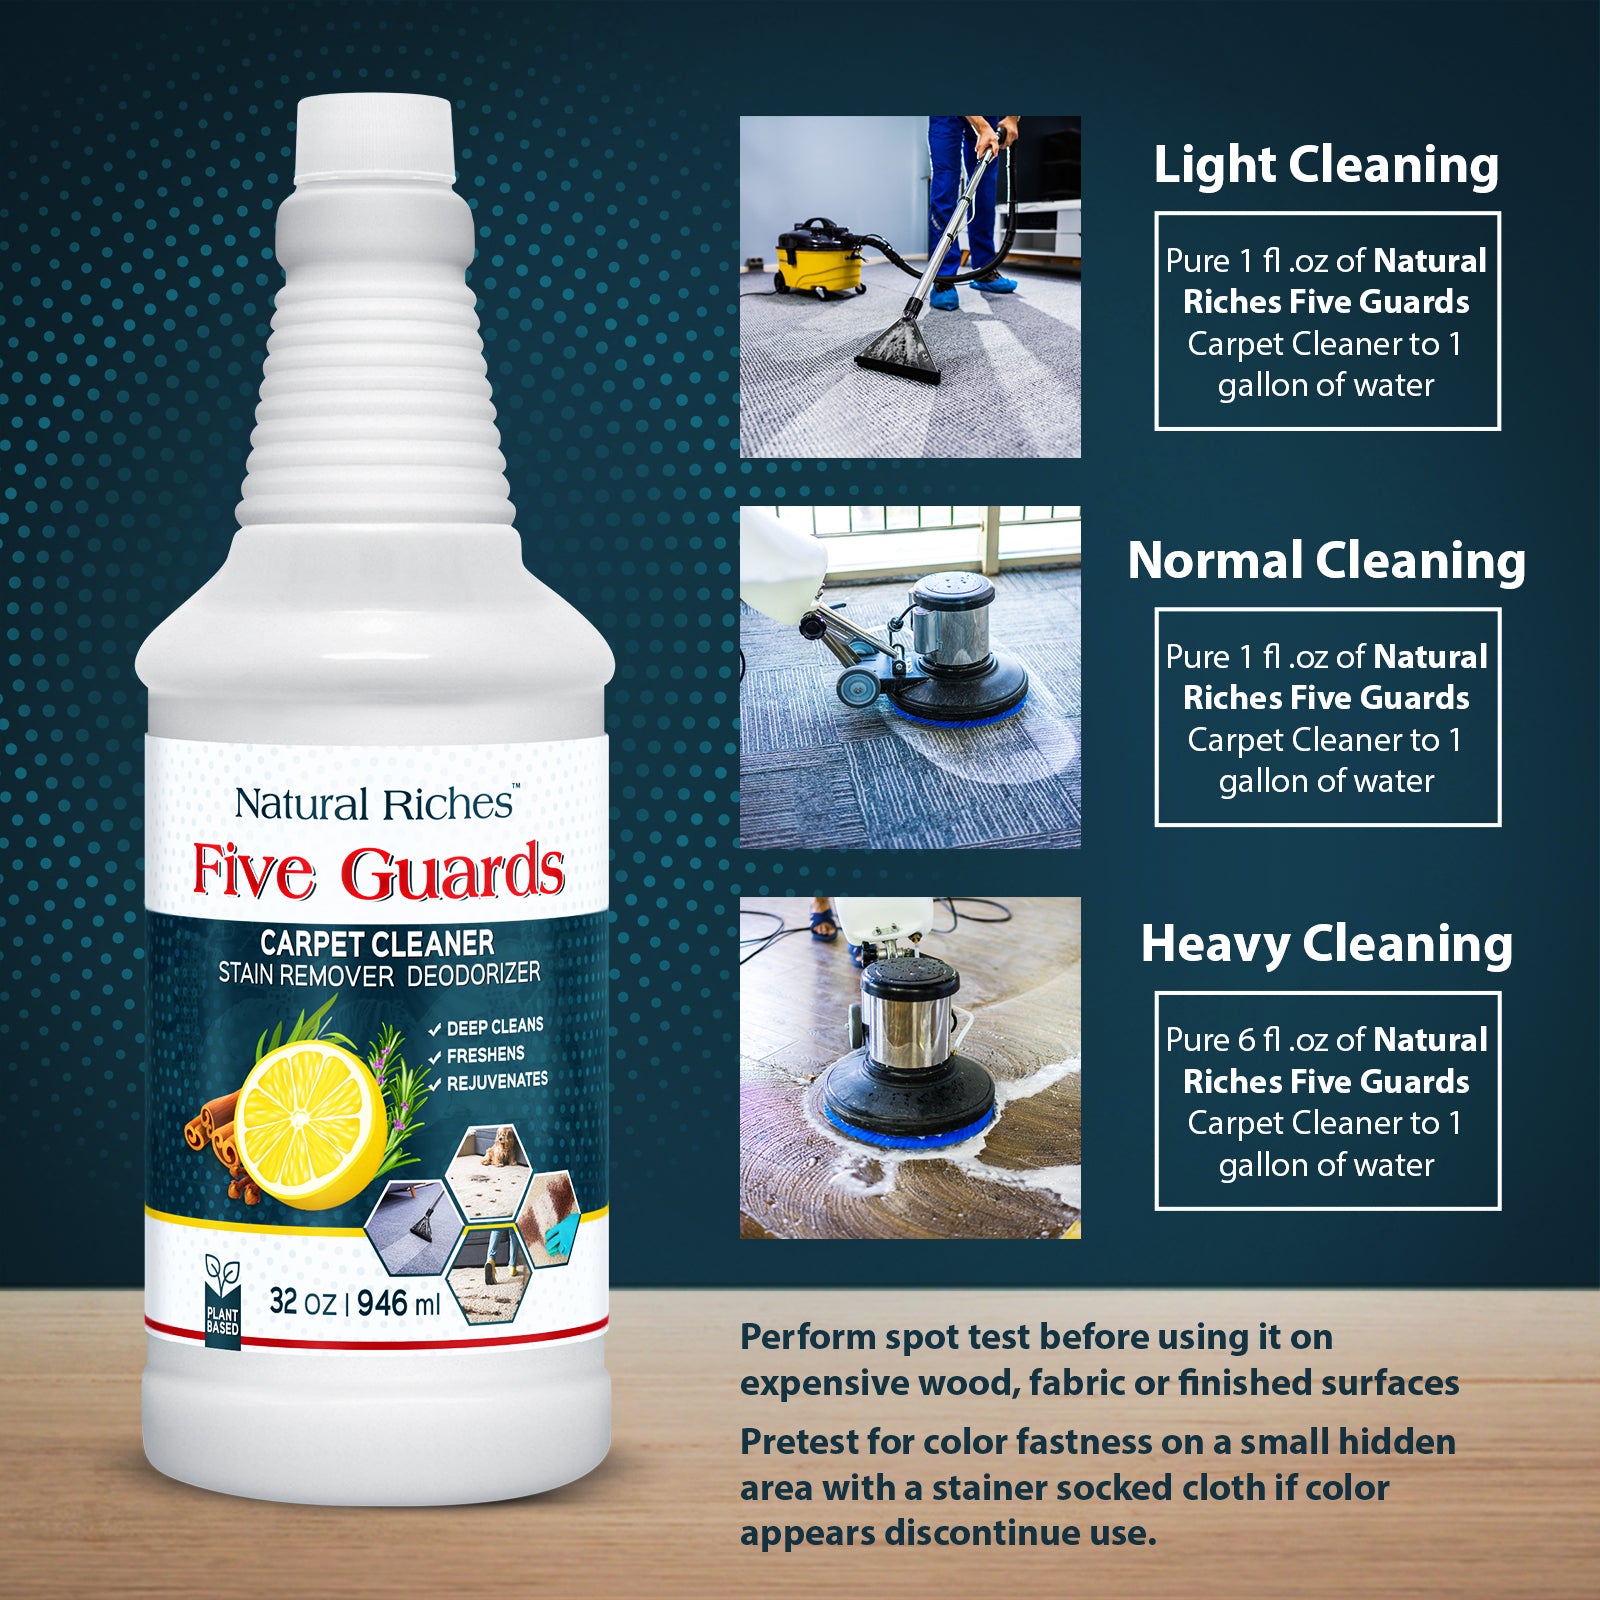 Upholstery Carpet Cleaner for Machine and spray use 32 fl oz